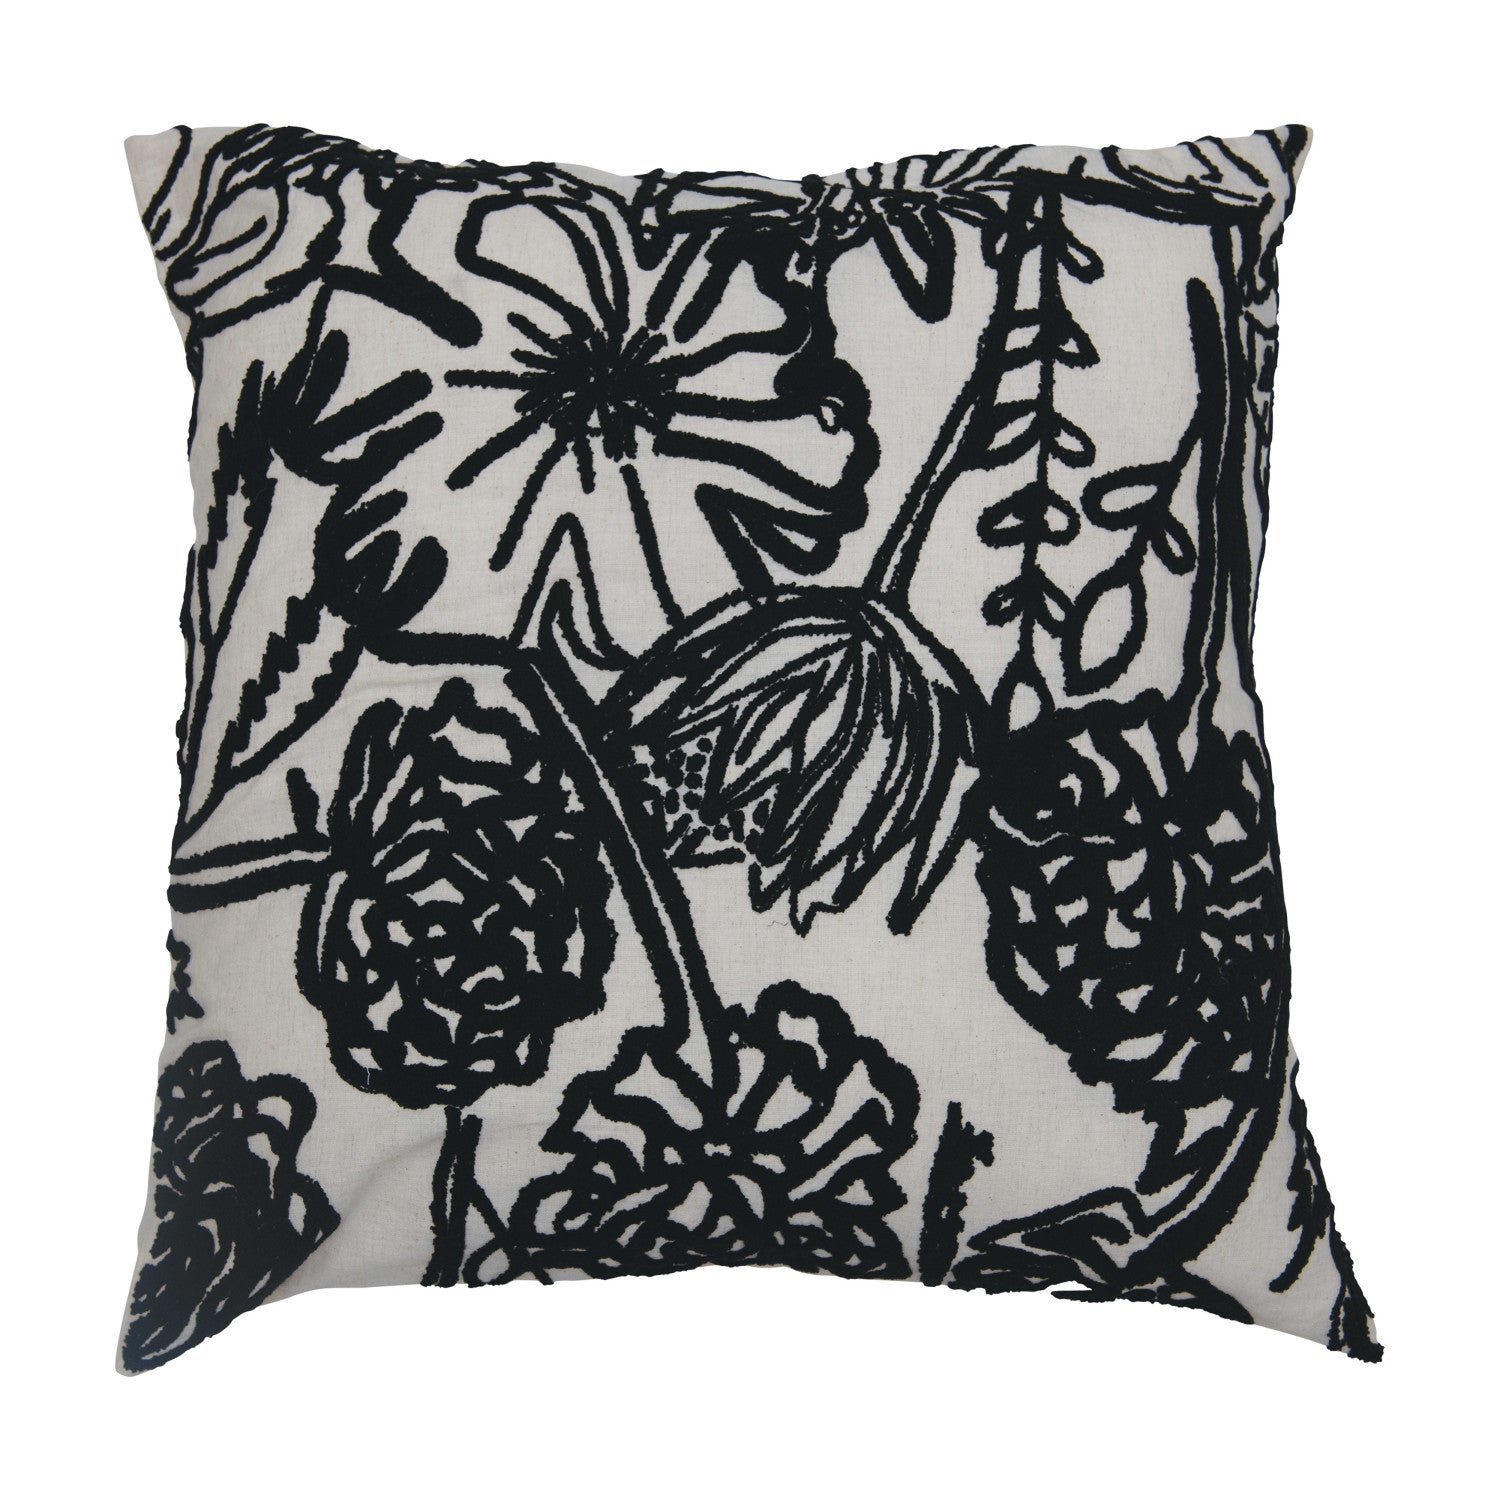 Black Embroidered Floral Square Pillow*